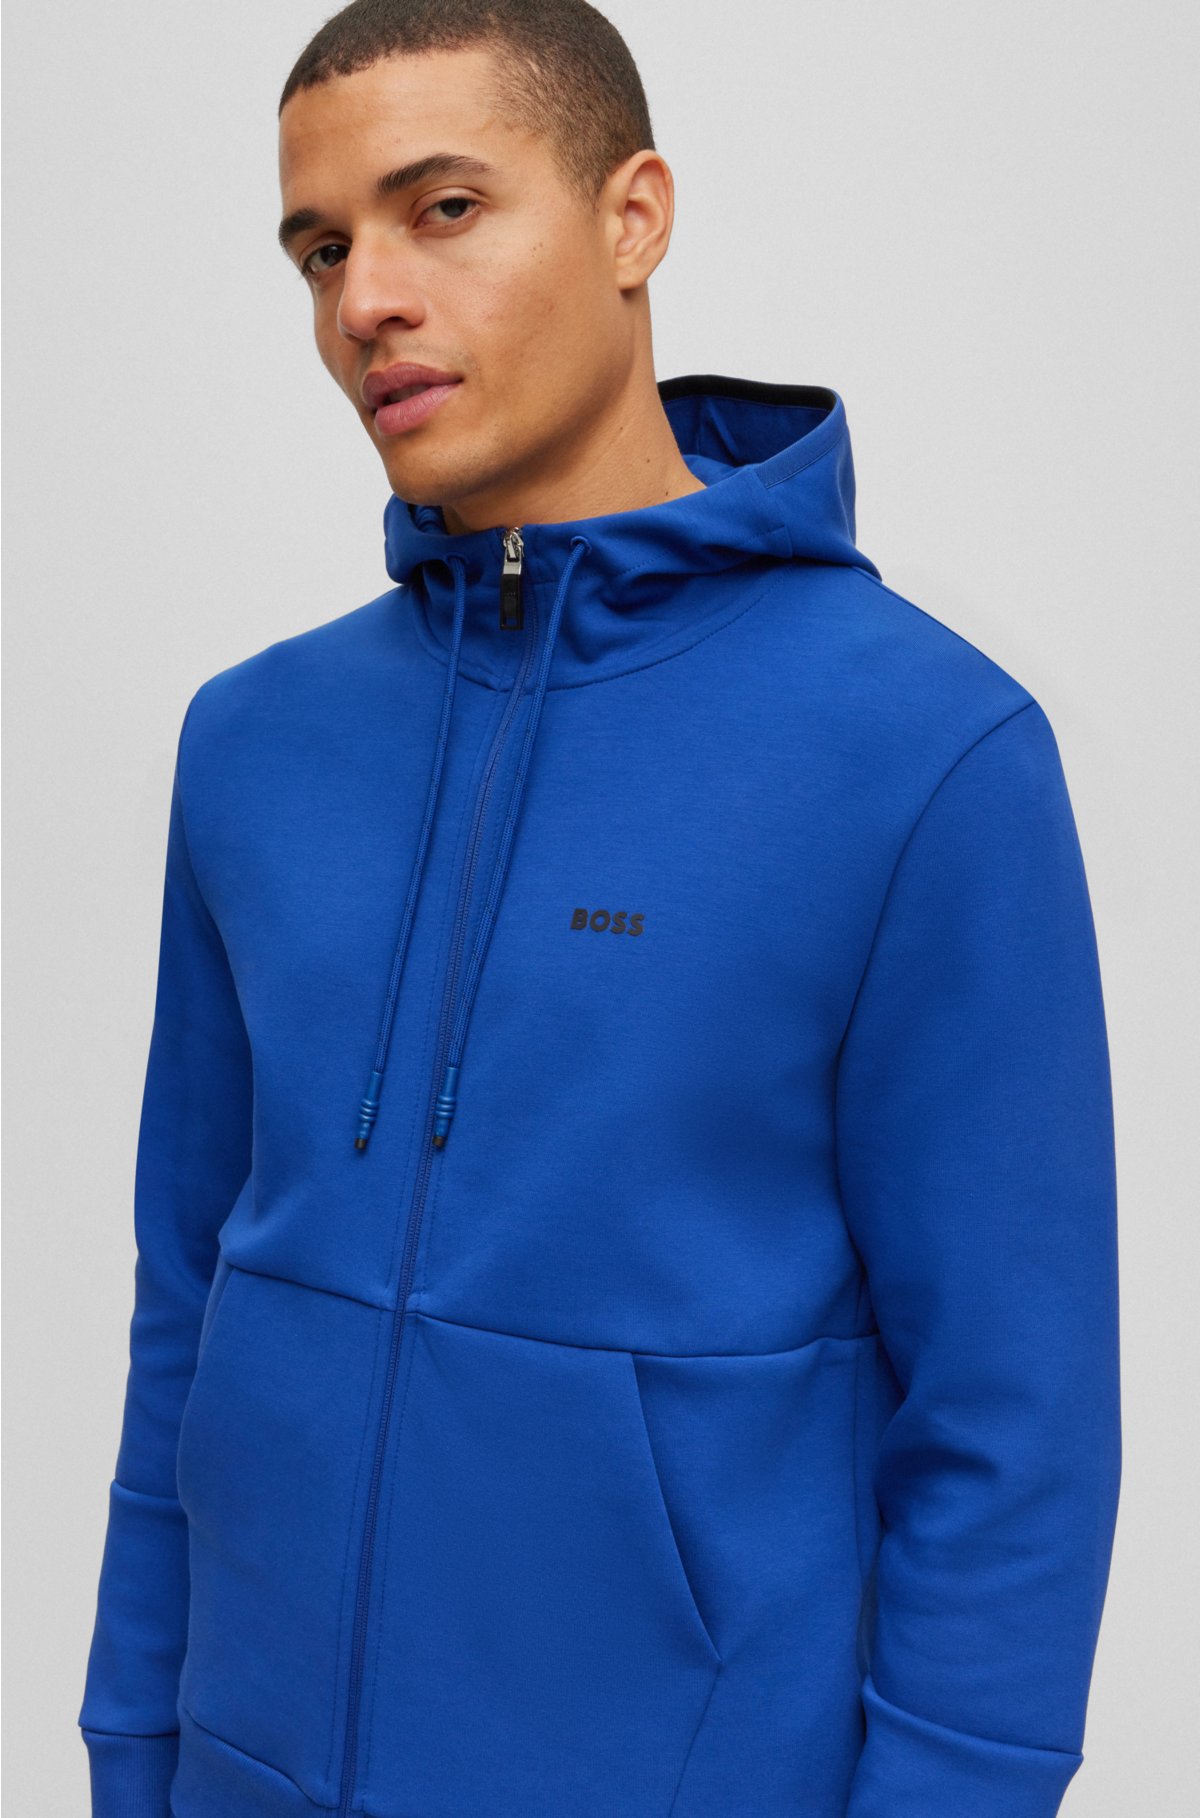 - Cotton-blend zip-up hoodie with embroidered